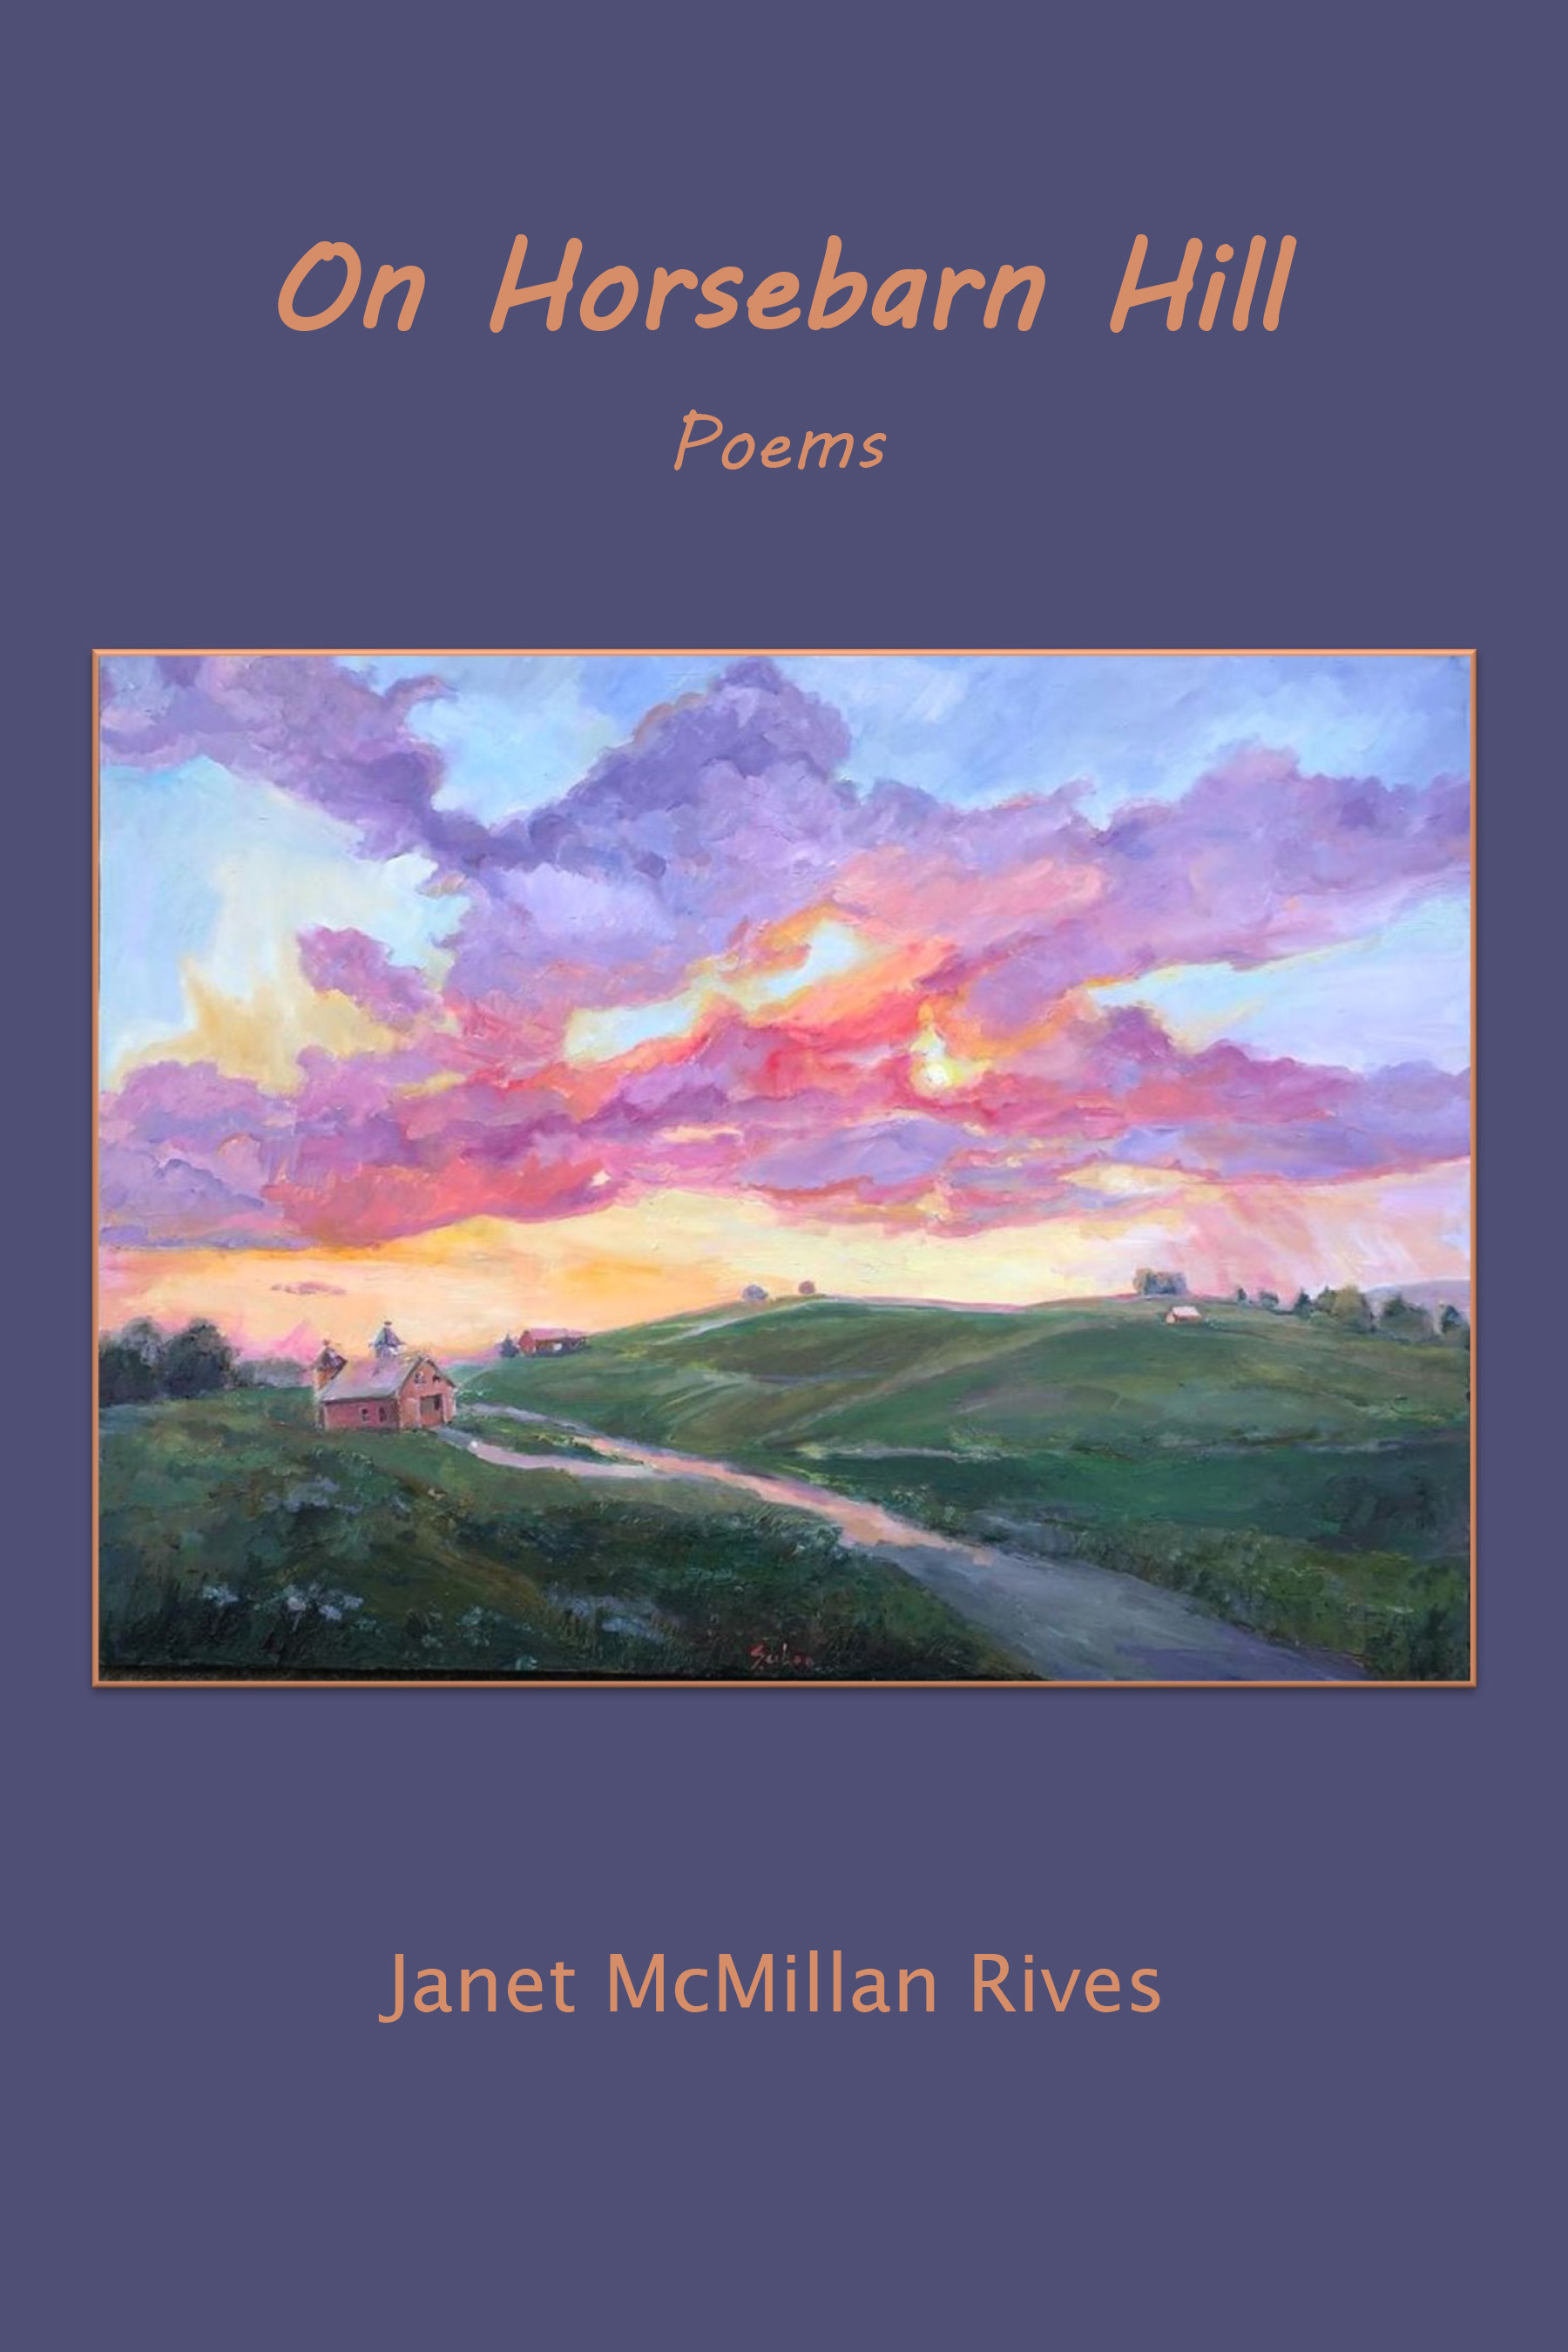 Cover of "On Horsebarn Hill: Poems,” with art of a sunset over a grassy hill.